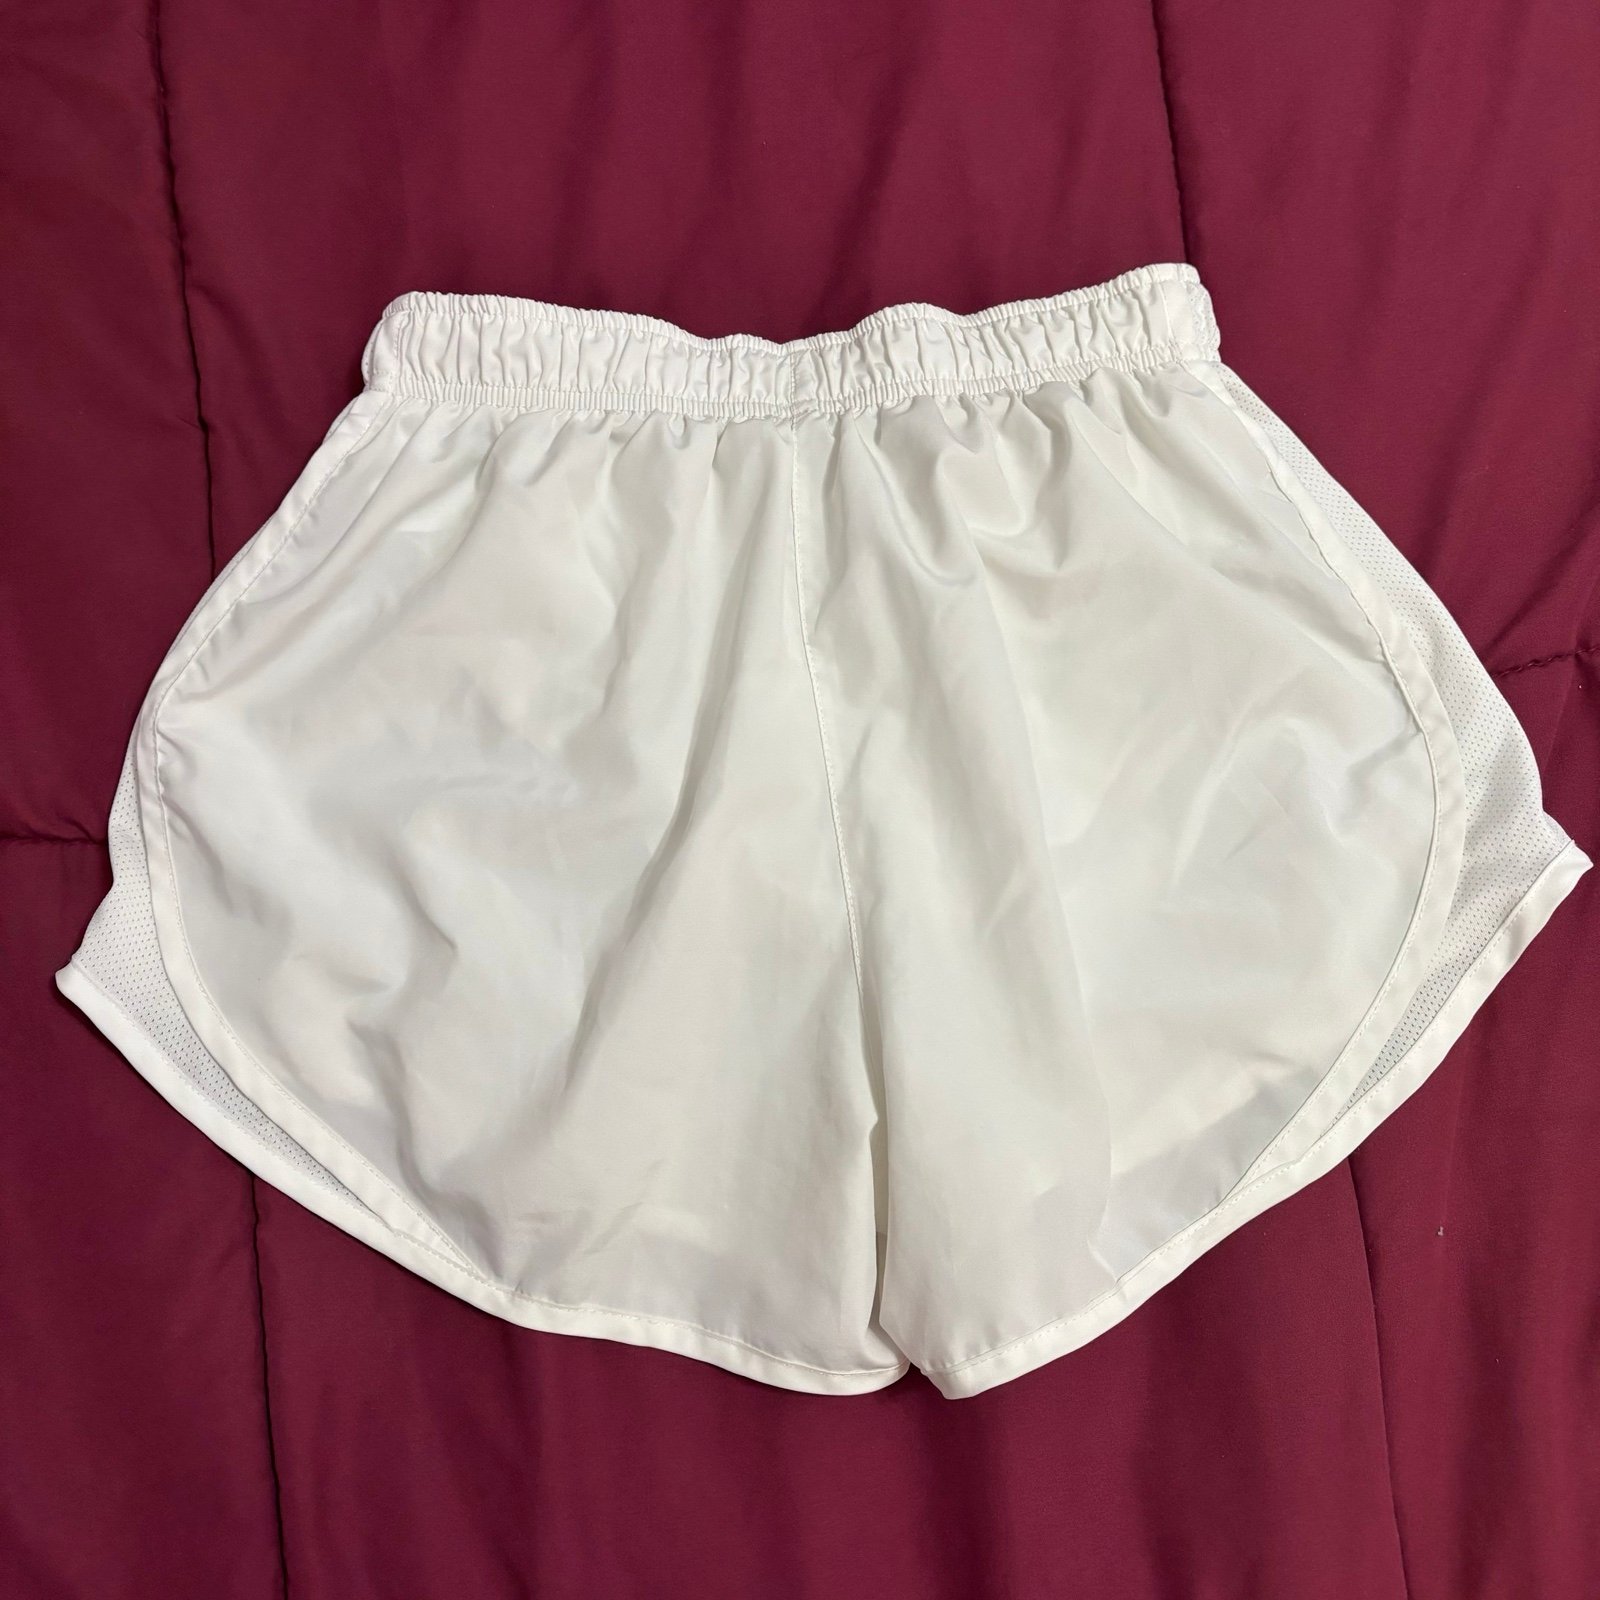 the Lowest price Nike Dri fit white shorts ow5ybOfMY just buy it